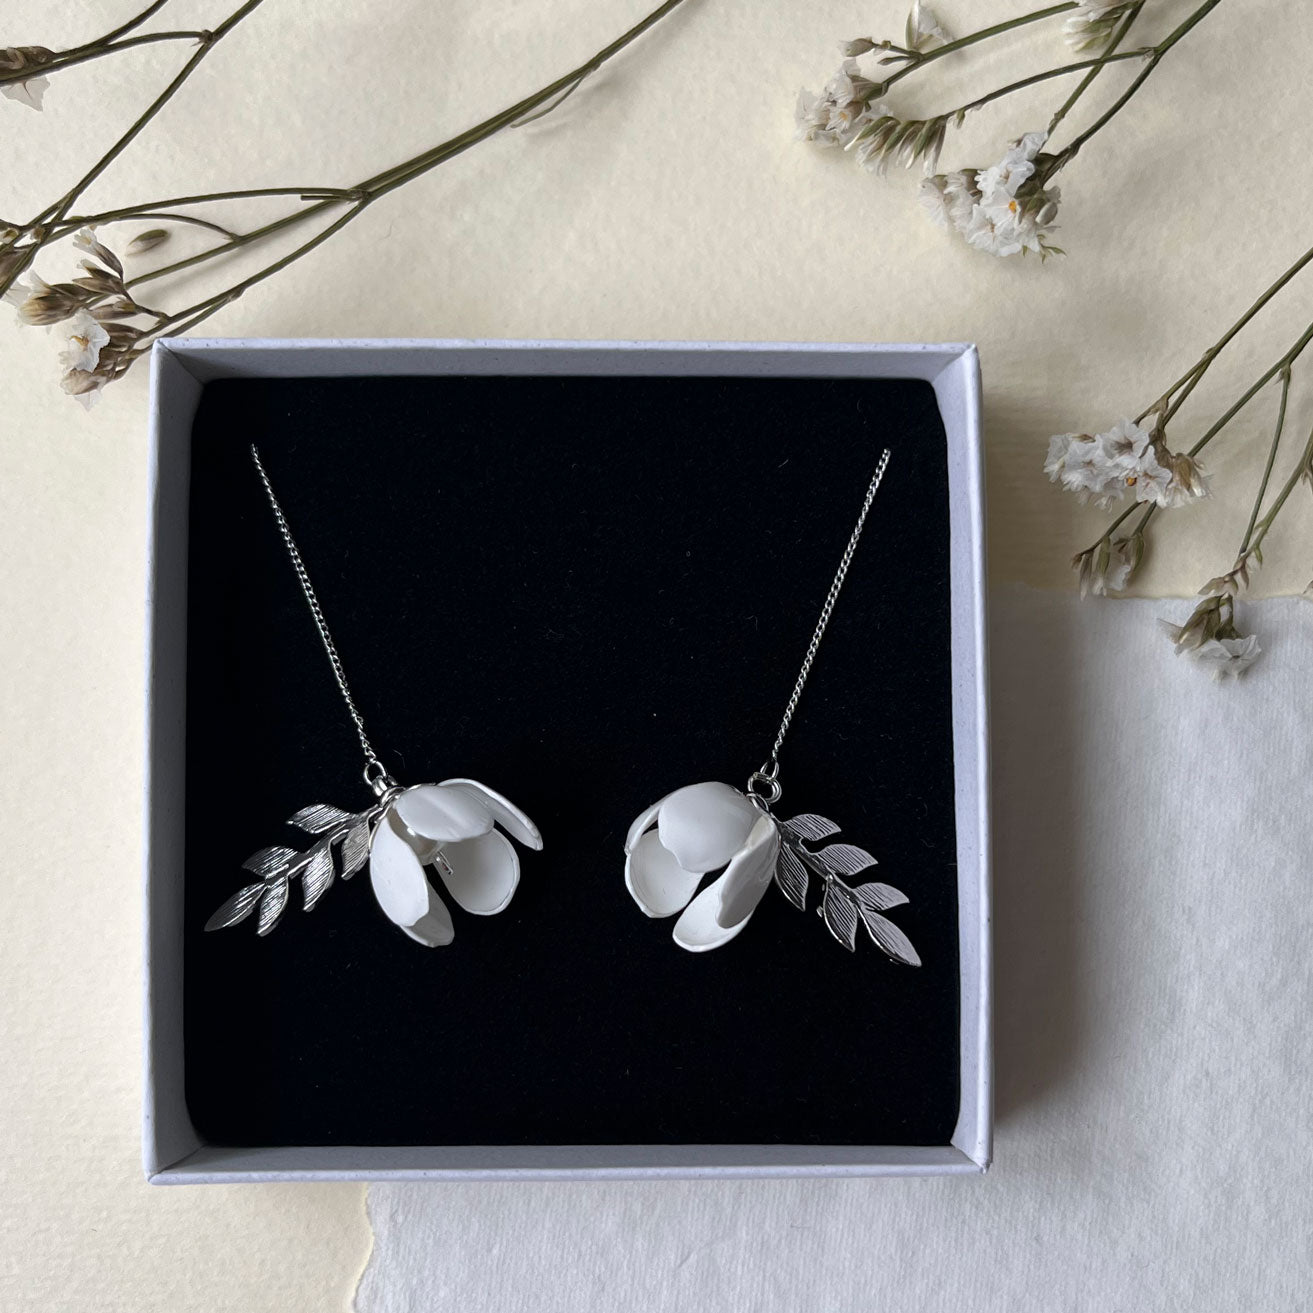 White Flower Adjustable Earrings Earrings Upcycle with Jing Silver Metal Parts 